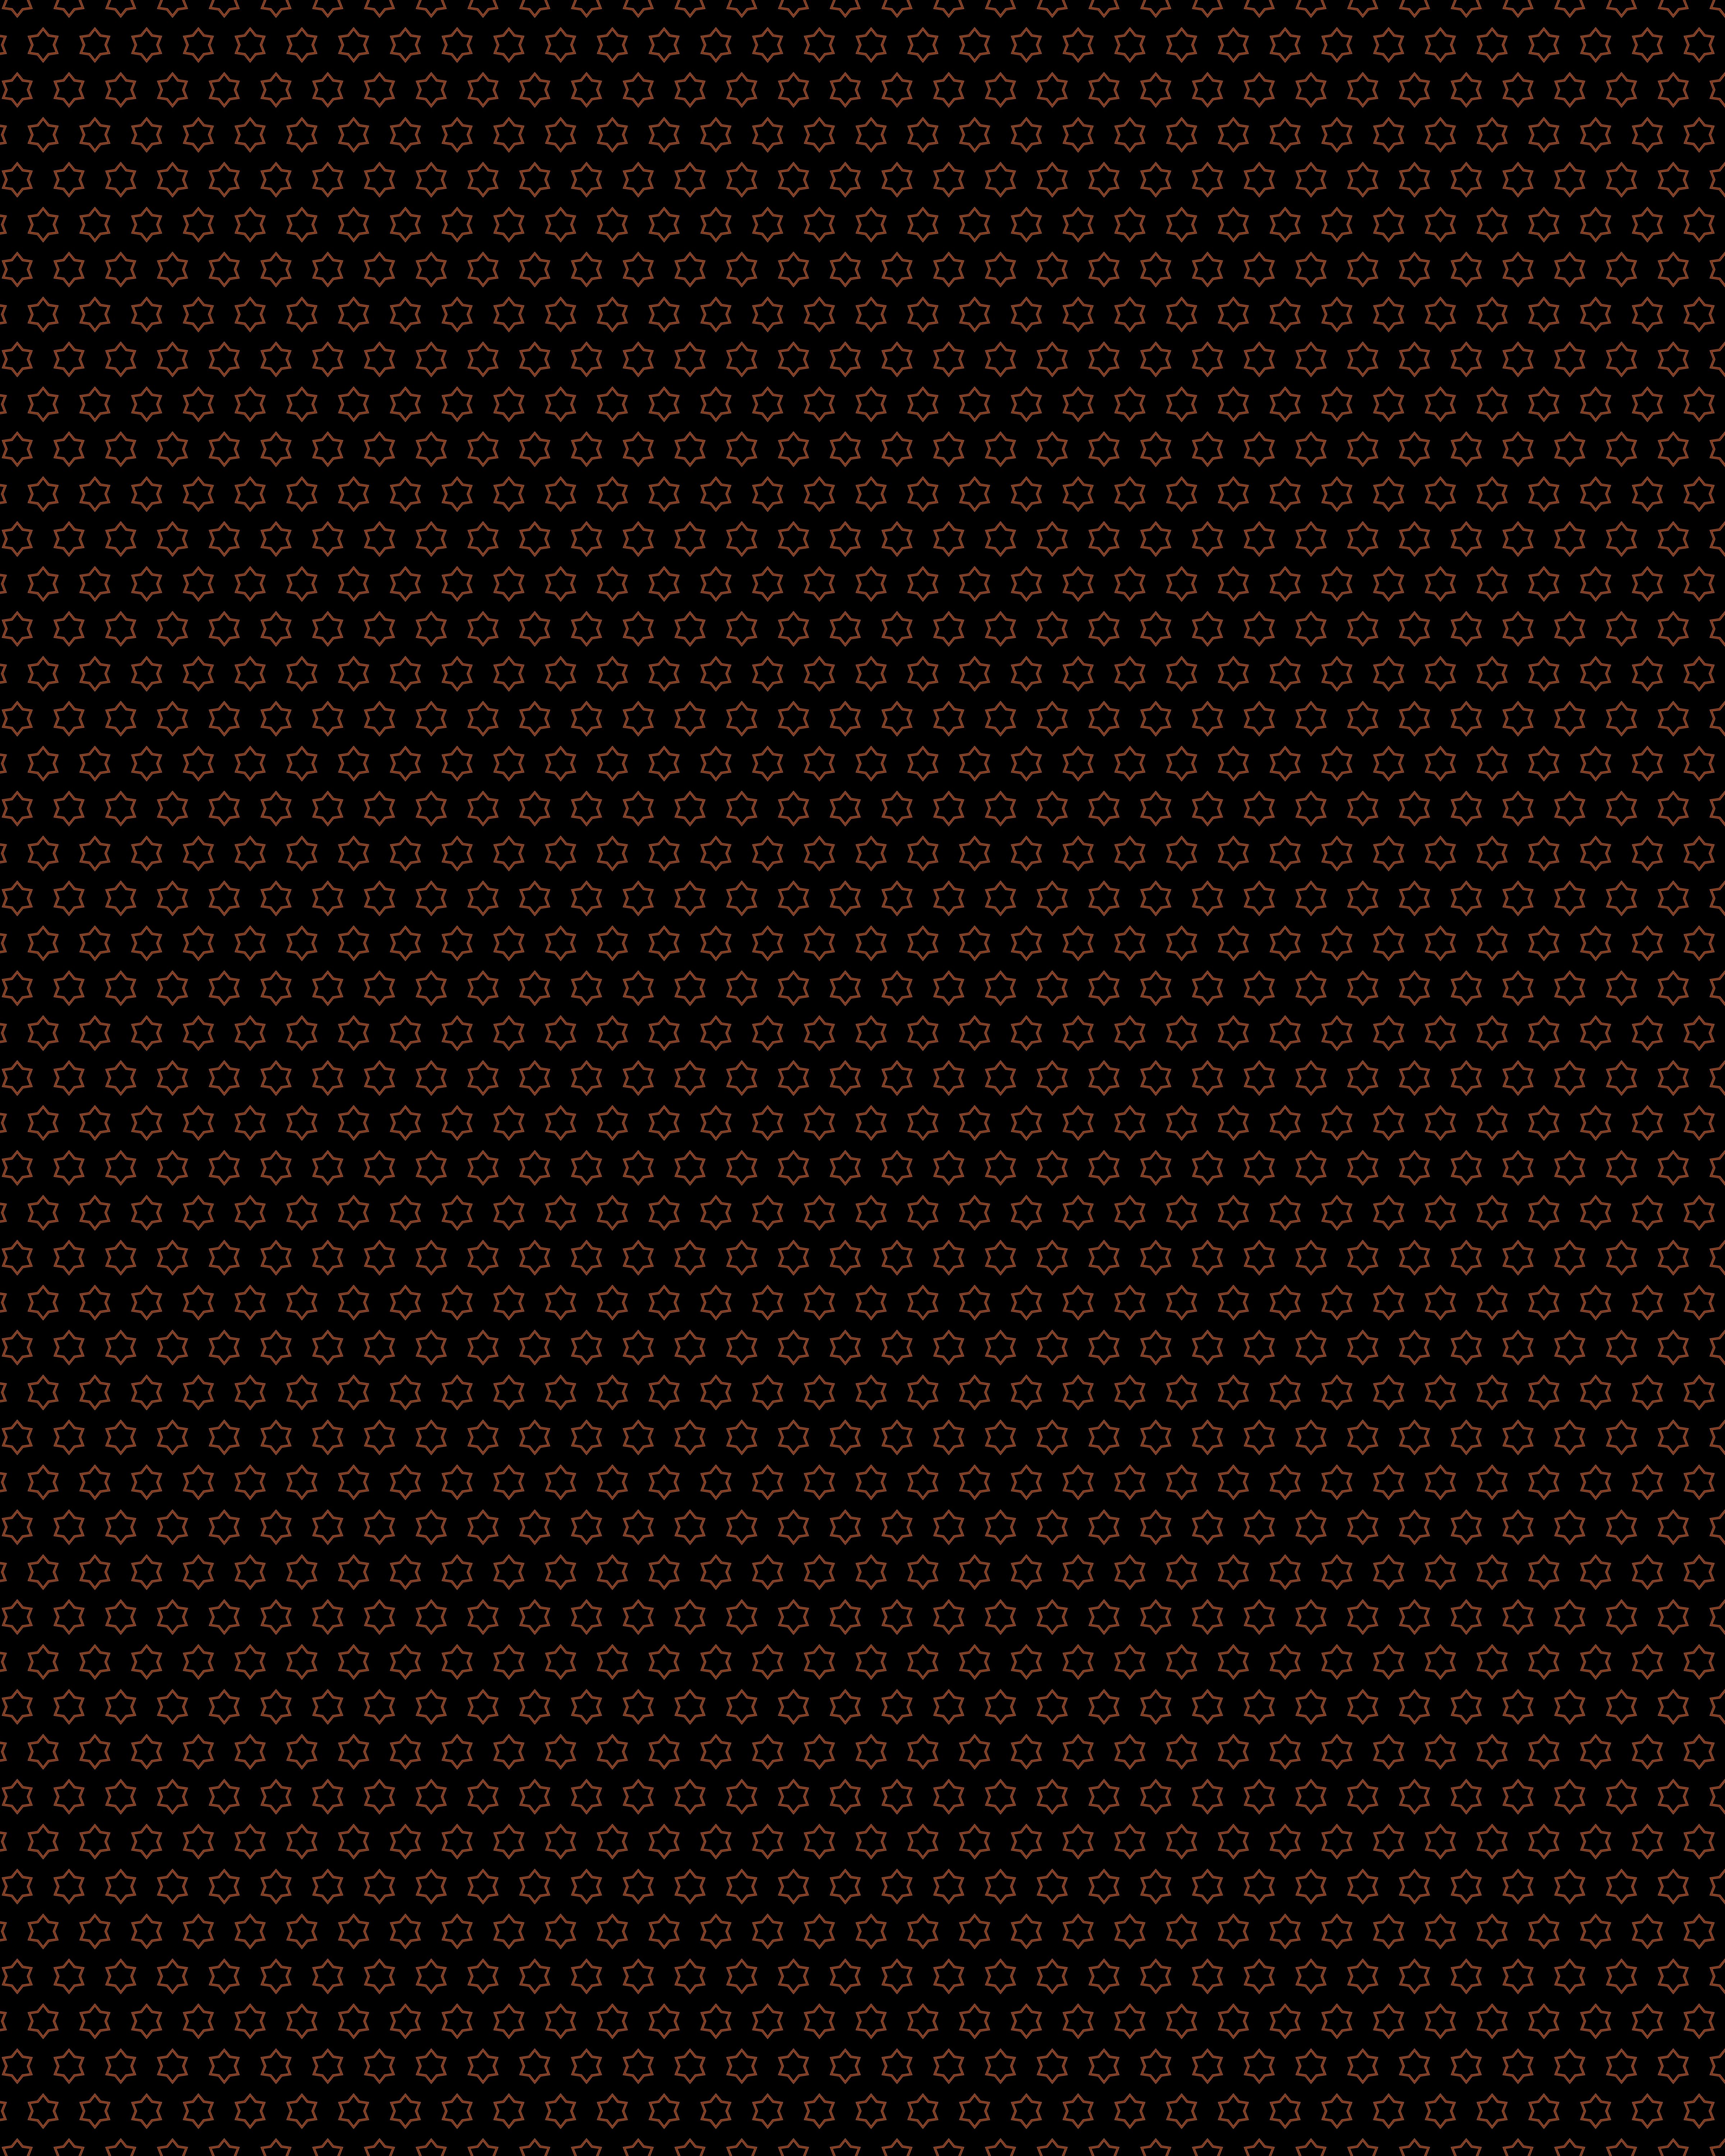 black background, geometric, stars, pattern, texture, textures, brown, shallow, small for android